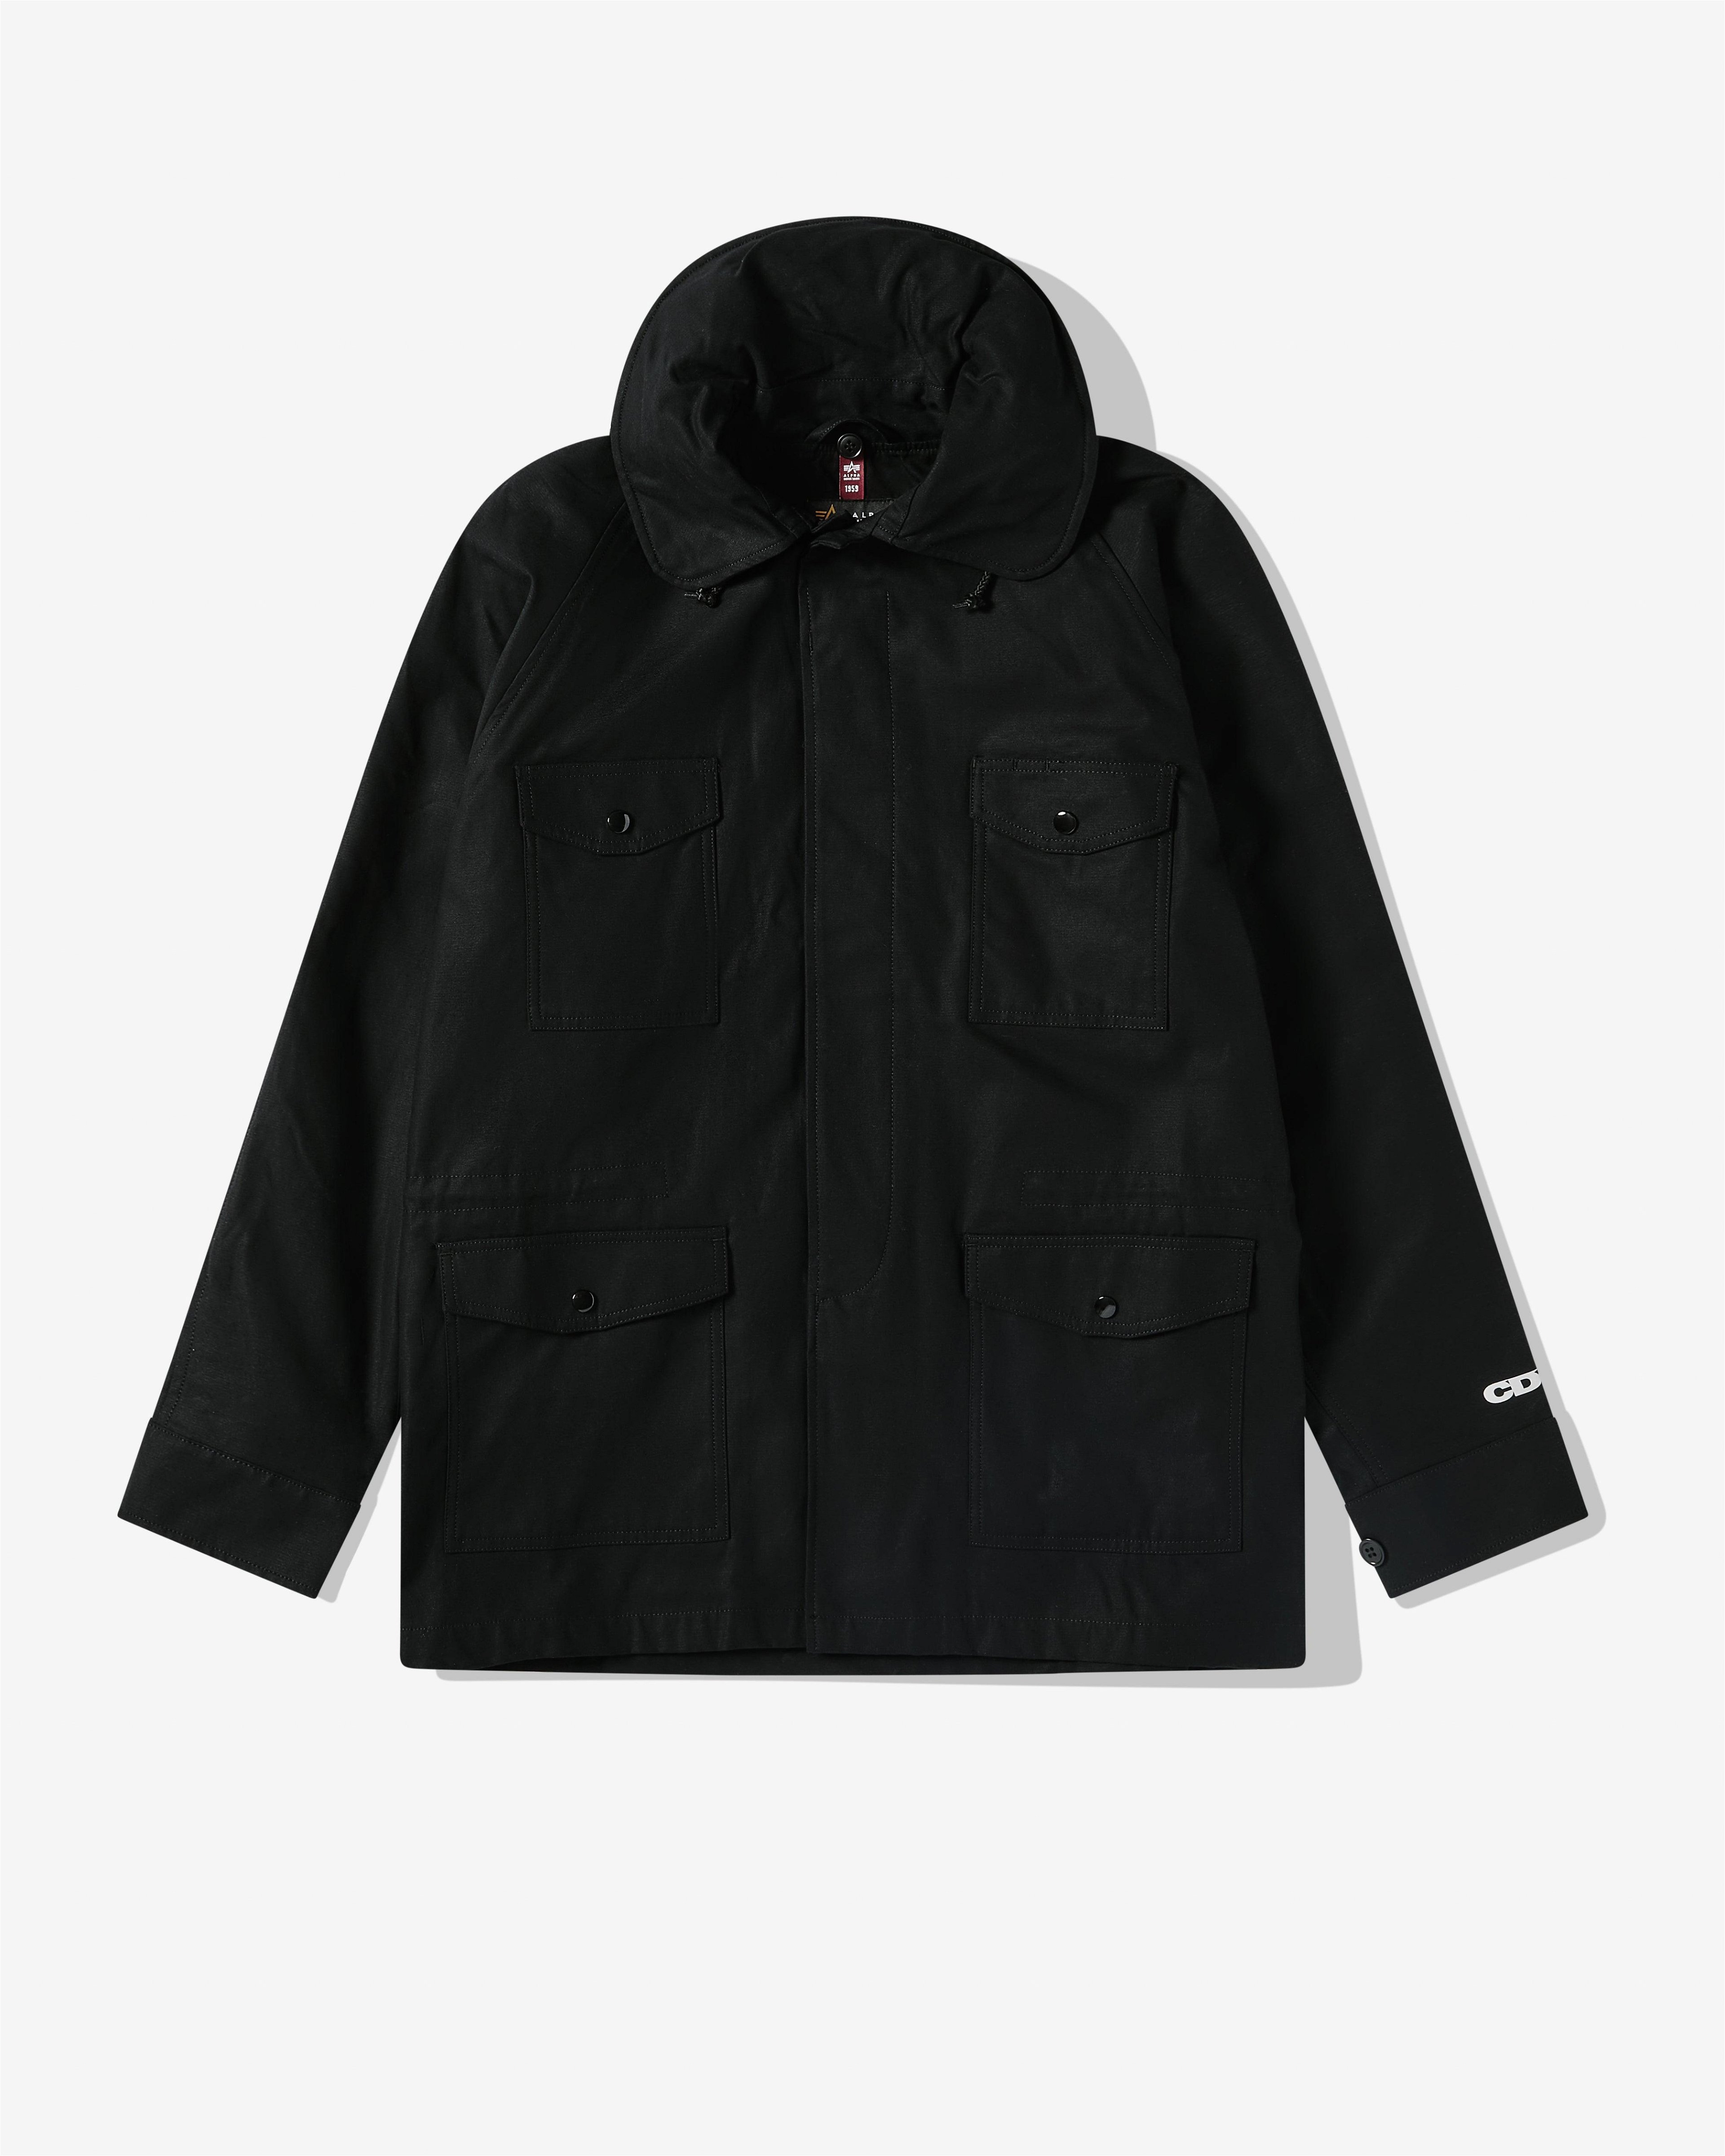 CDG - Alpha Industries Air Force Field Jacket - (Black) by COMME DES GARCONS